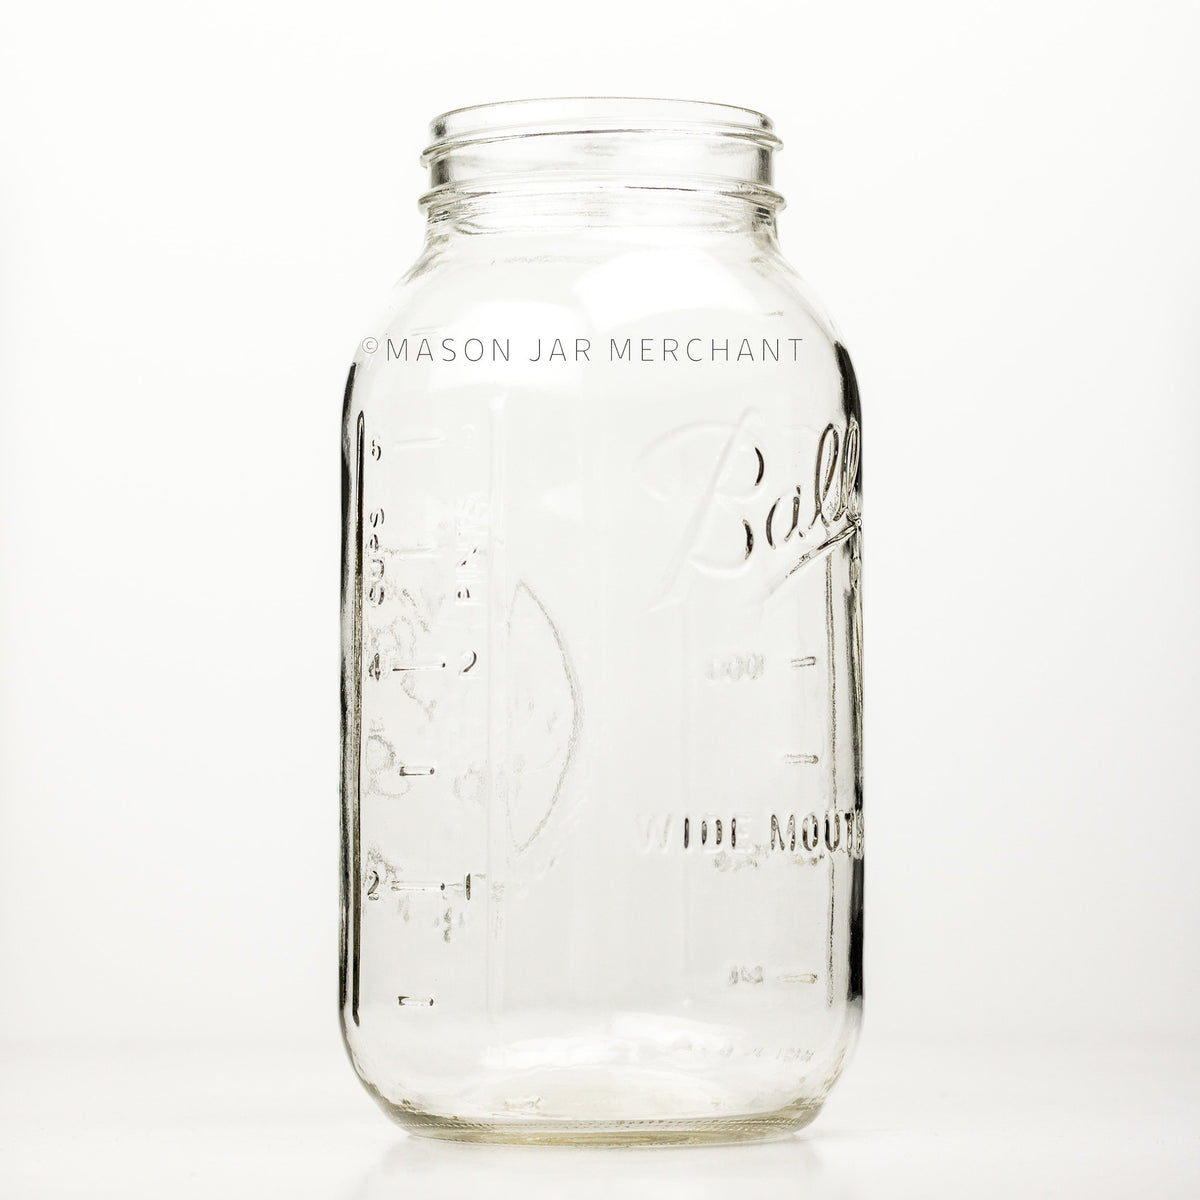 Wide mouth half-gallon mason jar with Ball Wide mouth logo, and fruity oval design visible on the back side of the jar. against a white background. It has a measurement engraved on its back